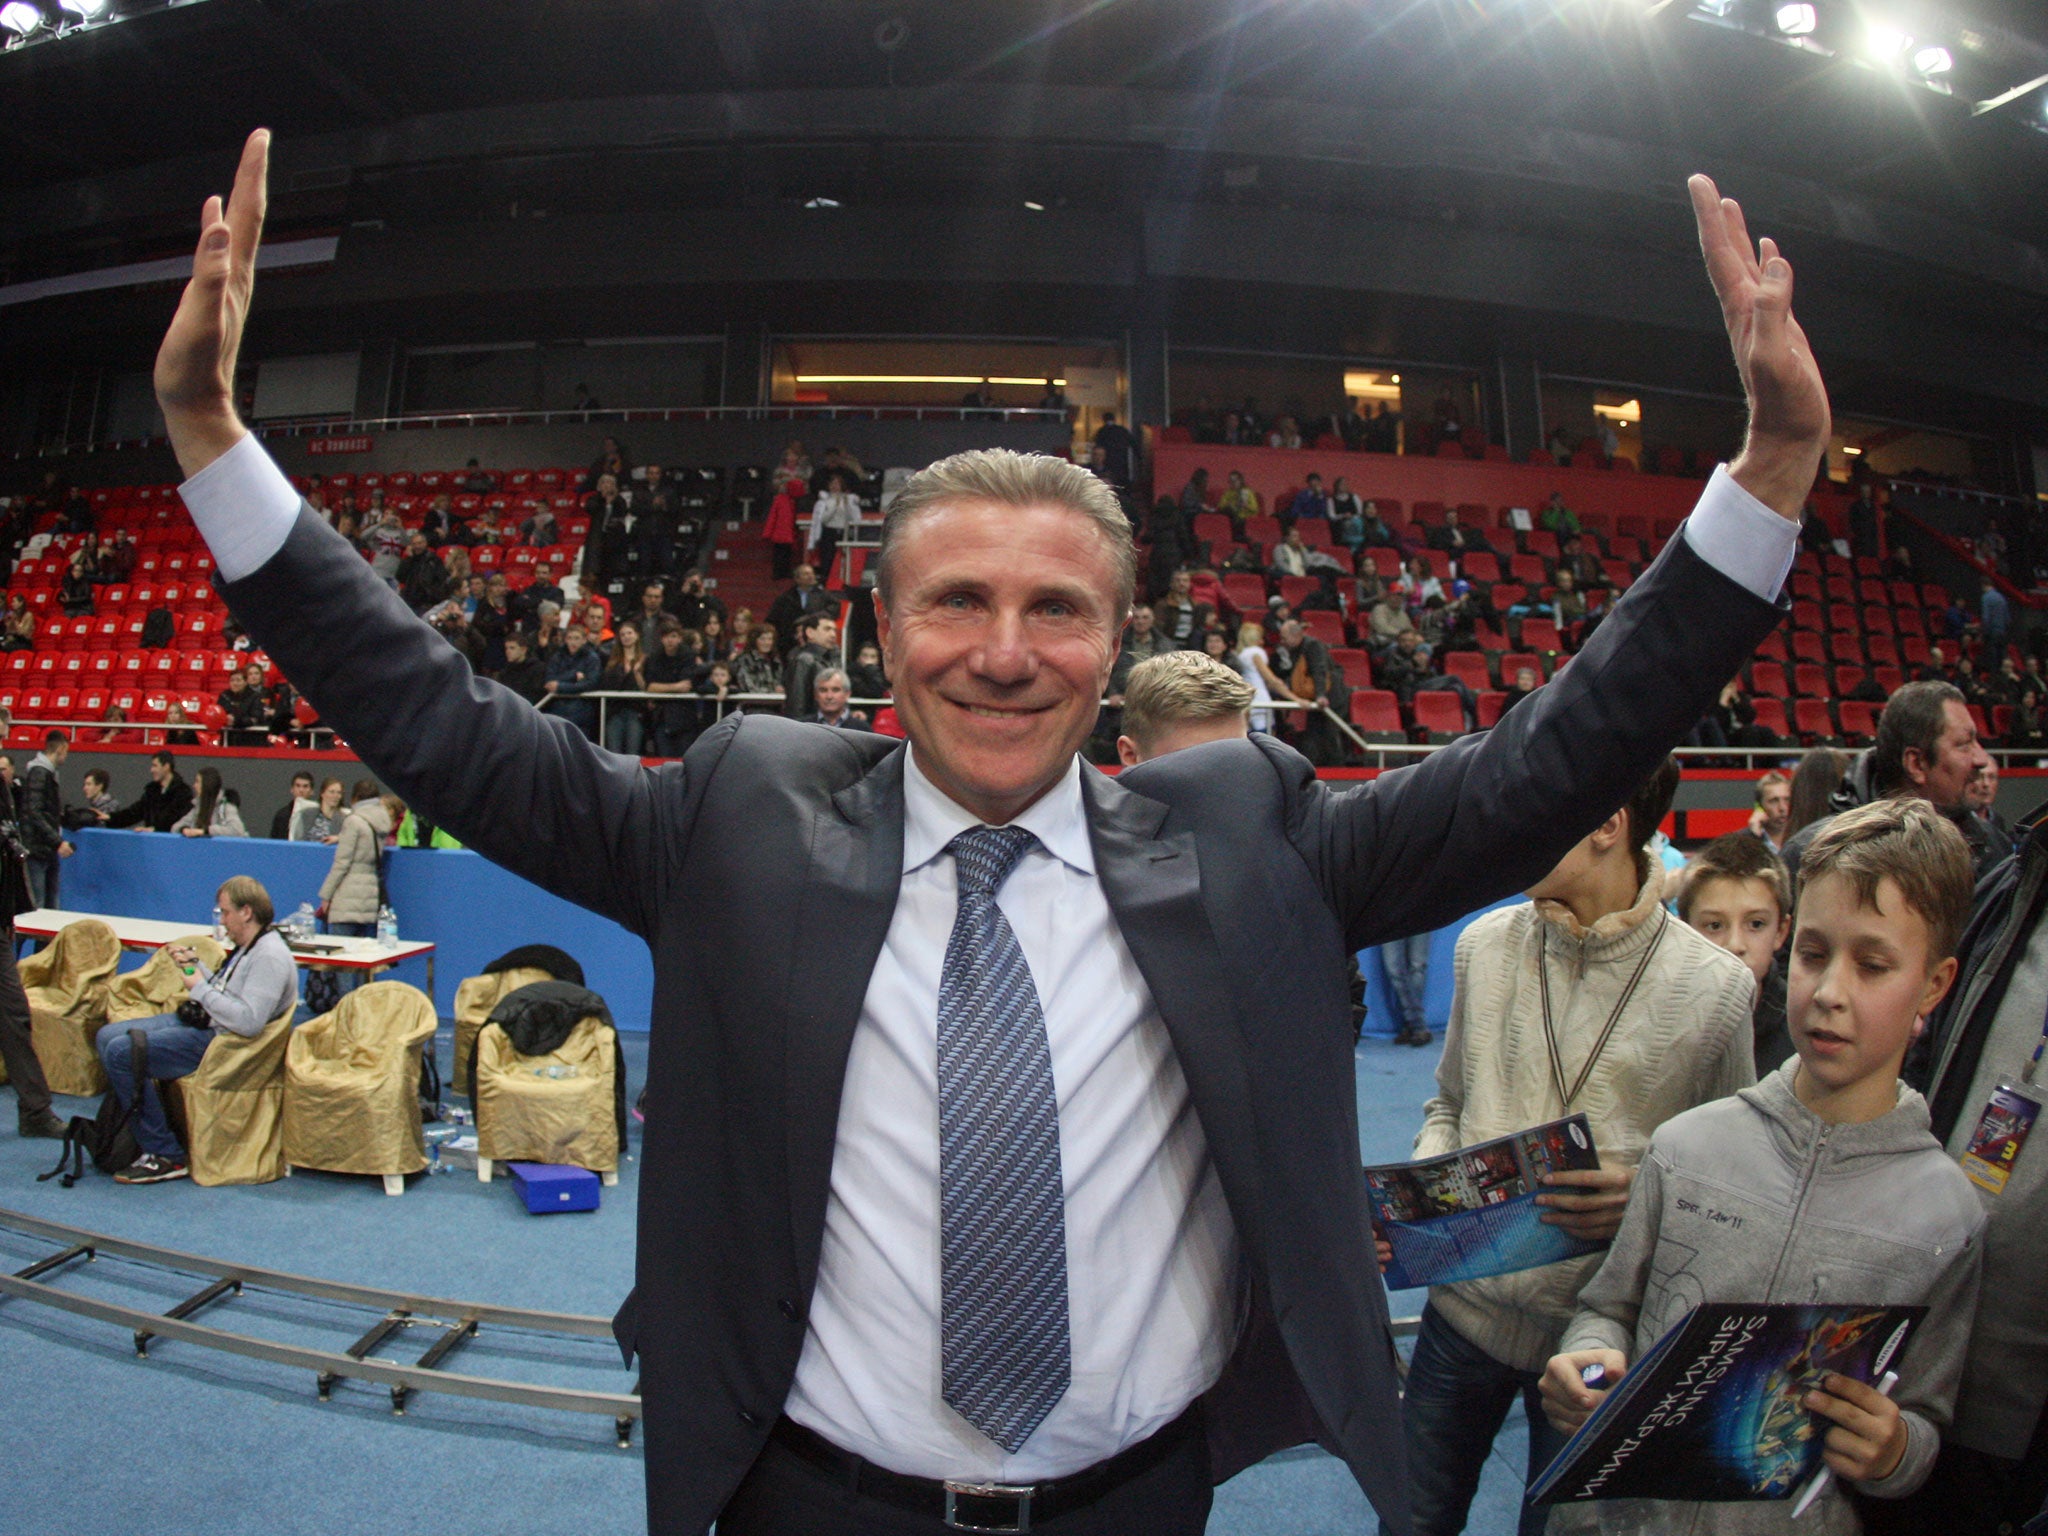 If Coe elects to join the BBC, fellow vice-president Bubka would be in pole position for the presidency